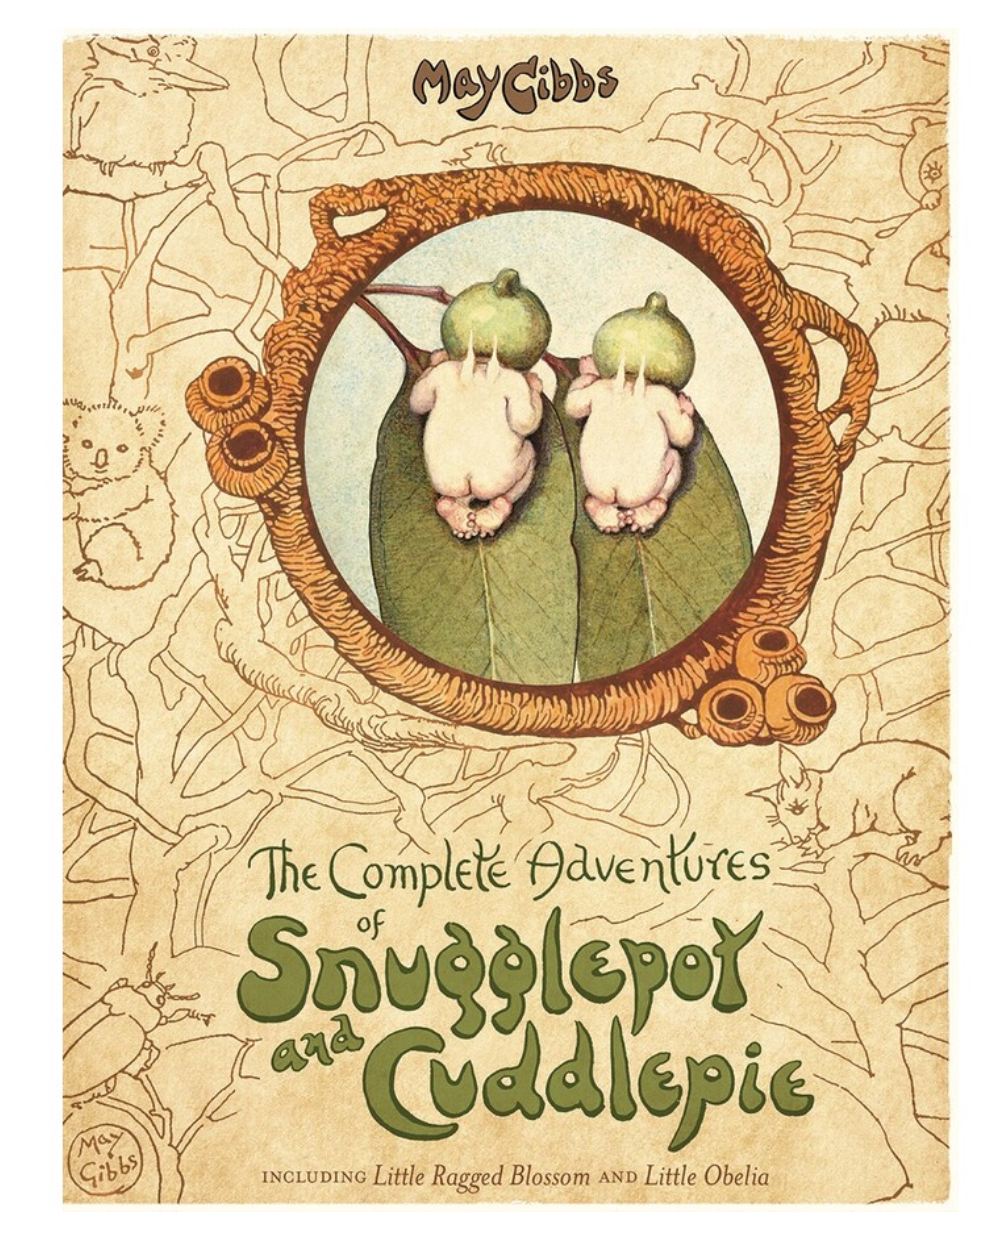 The Complete Adventures of Snugglepot & Cuddlepie - May Gibbs - Hardback